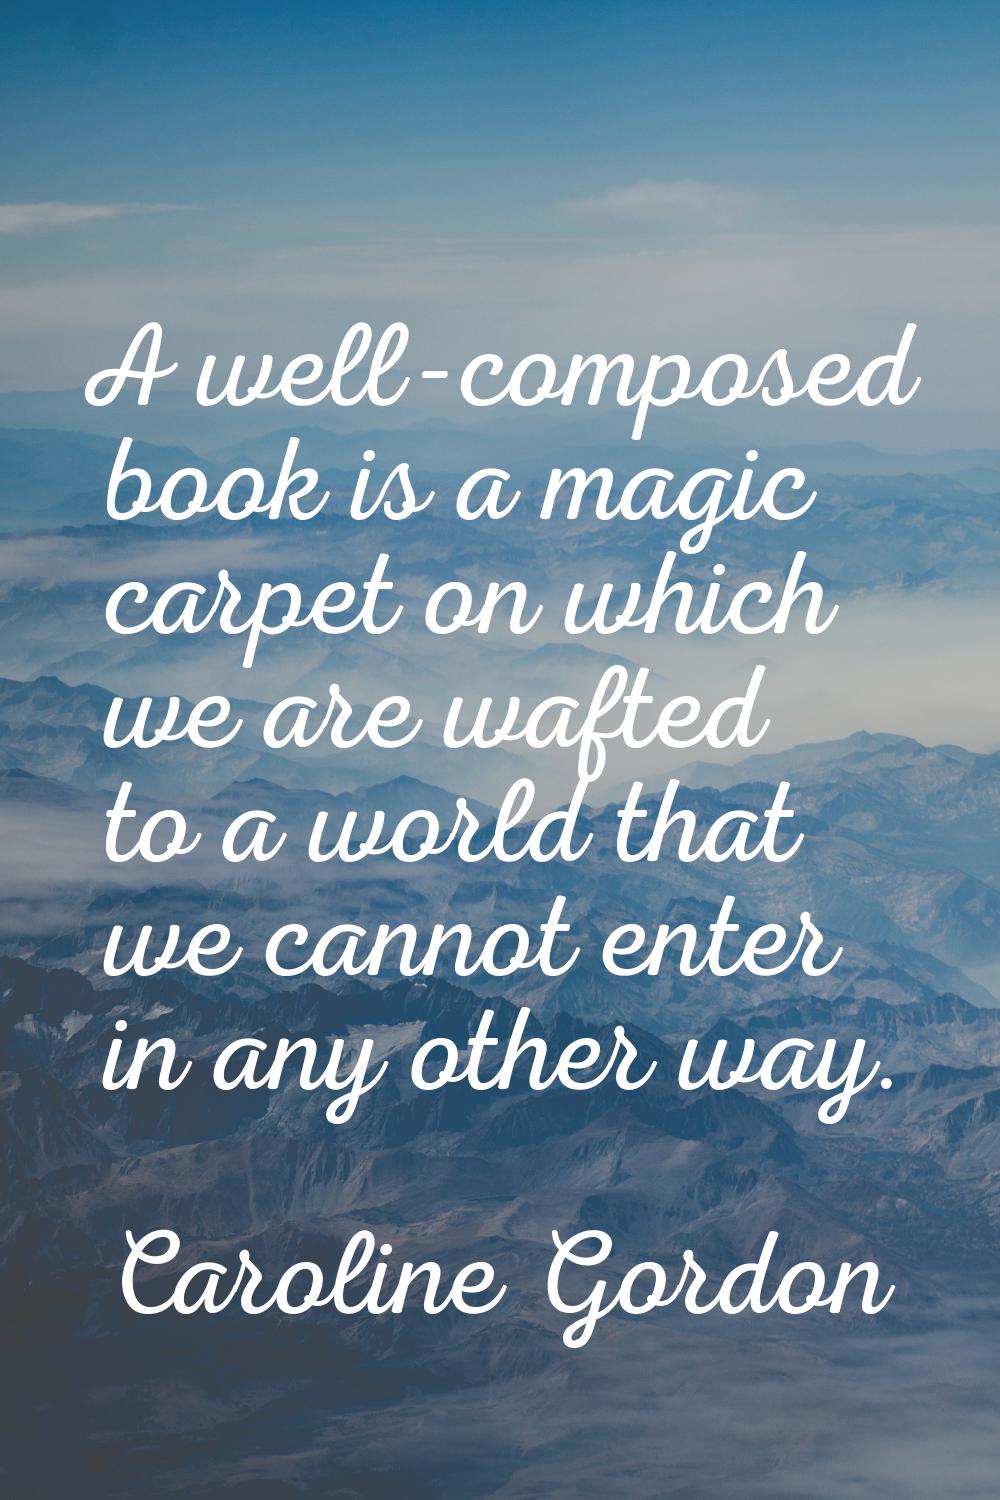 A well-composed book is a magic carpet on which we are wafted to a world that we cannot enter in an